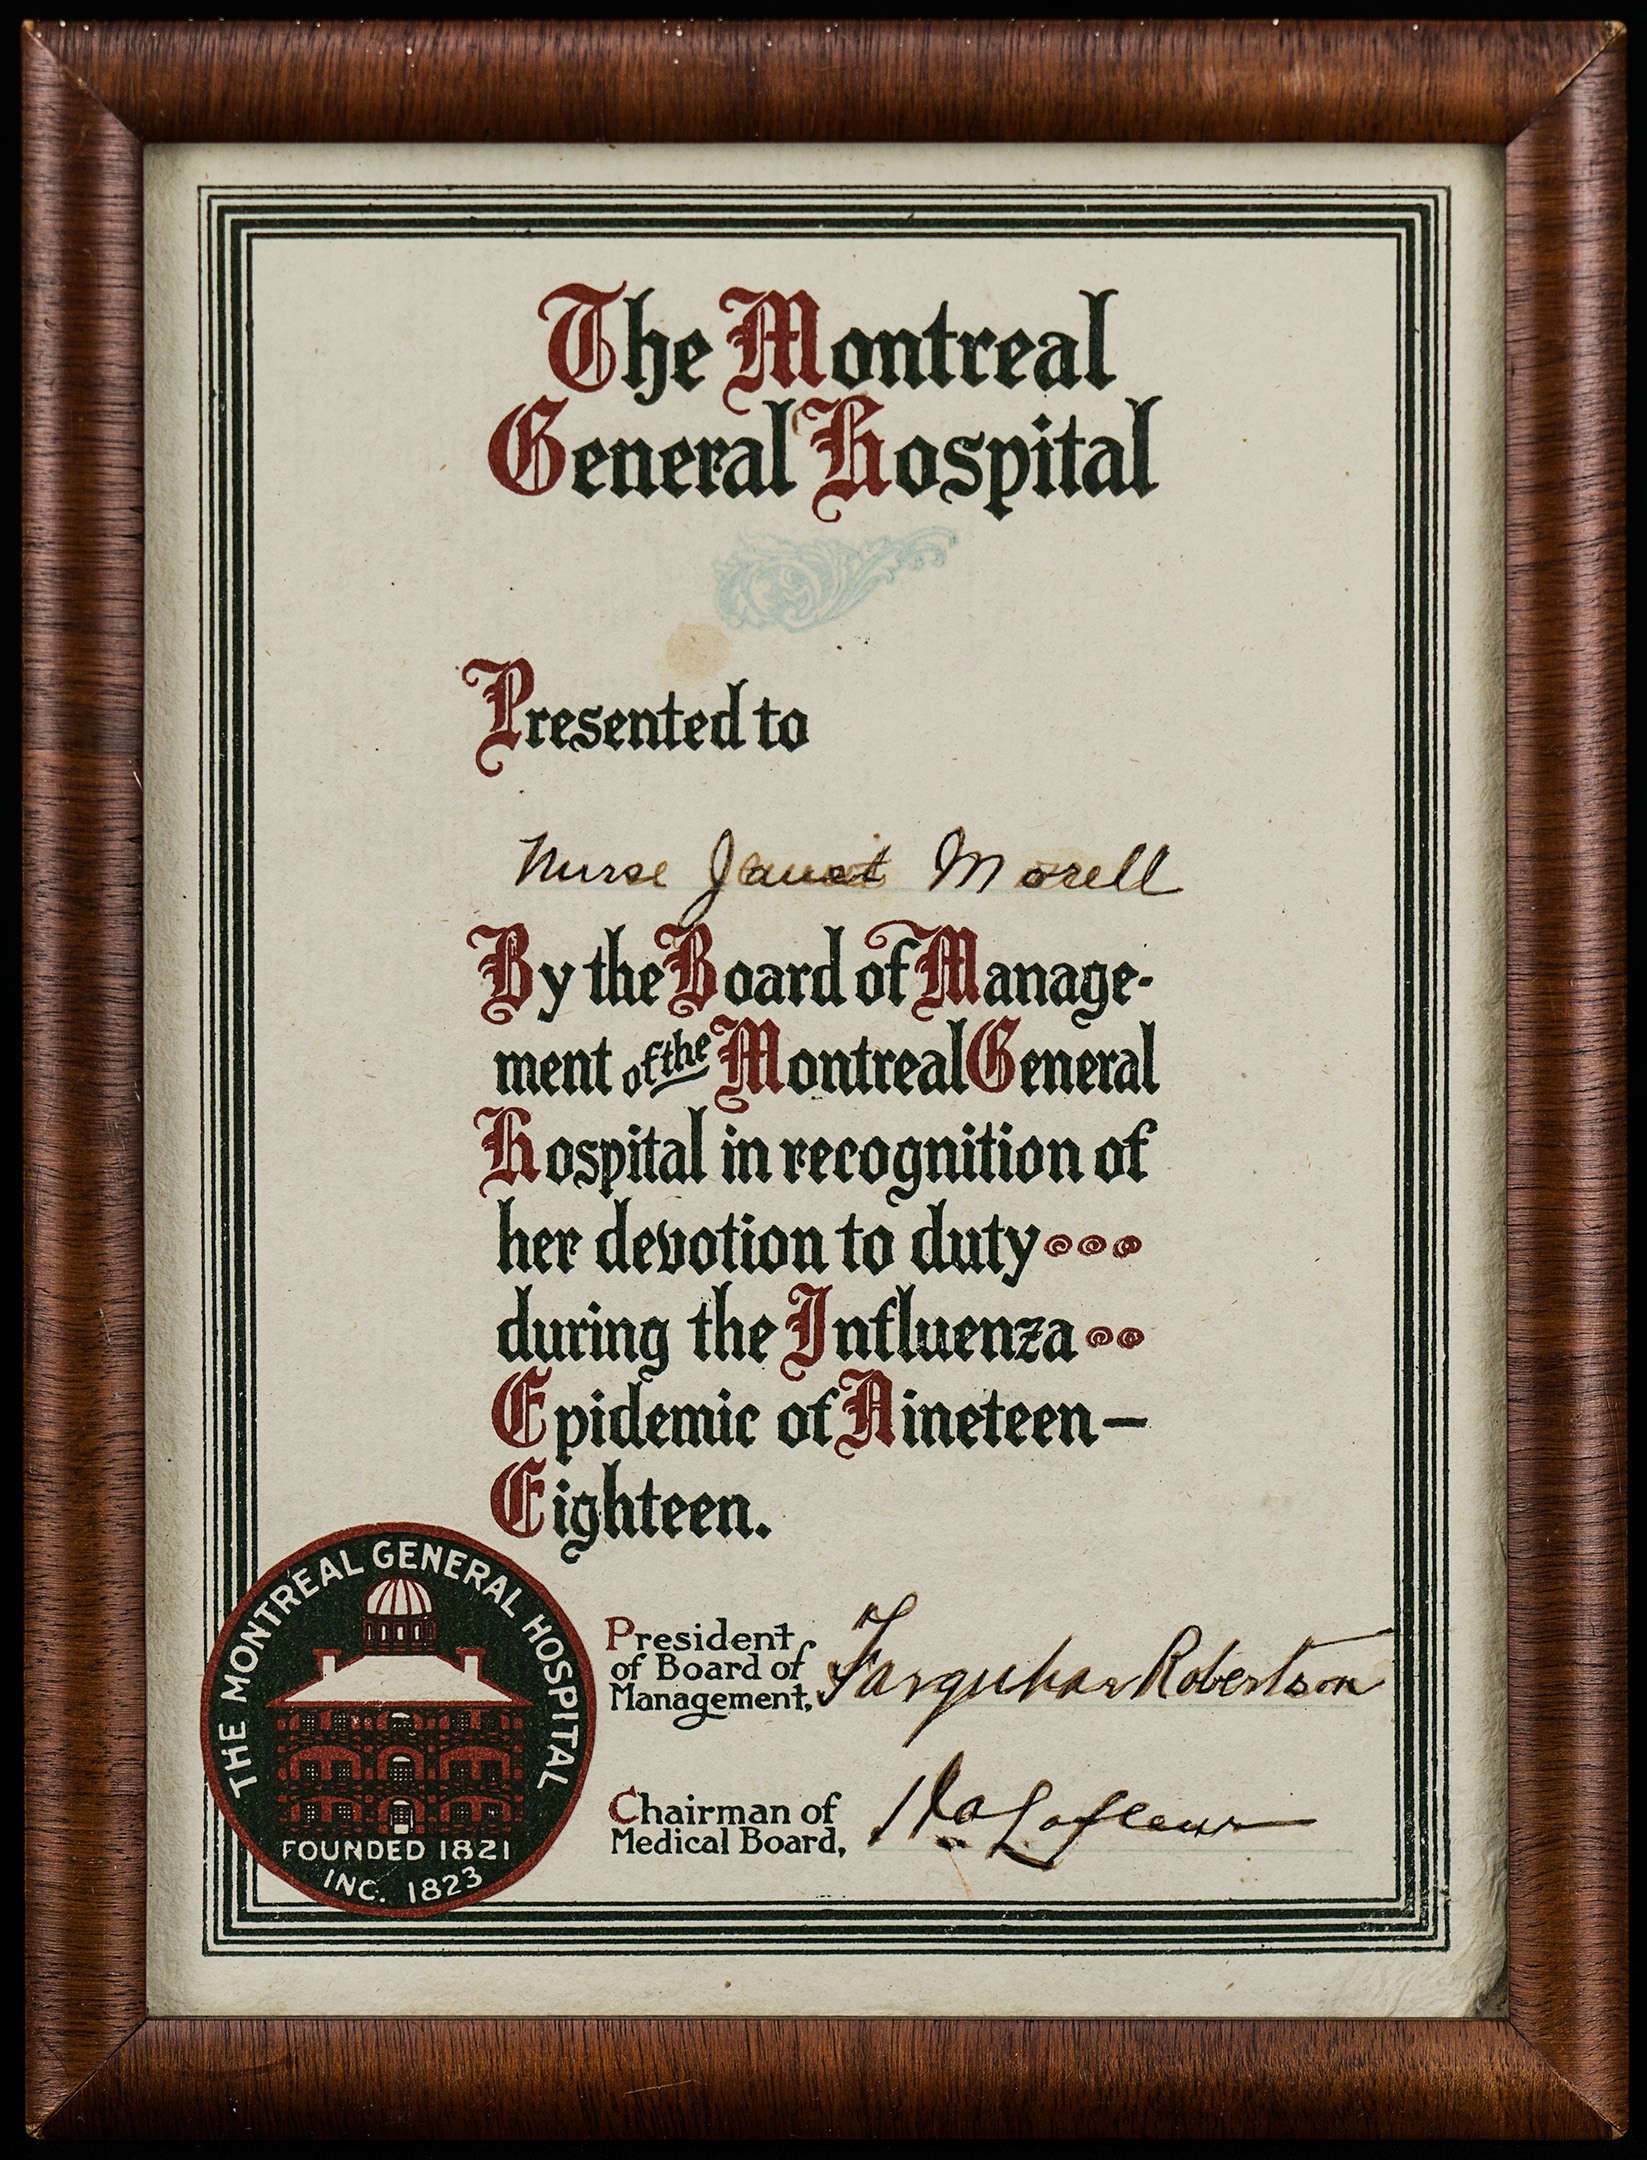 certificate for service during the 1918 influenza pandemic awarded to a nurse